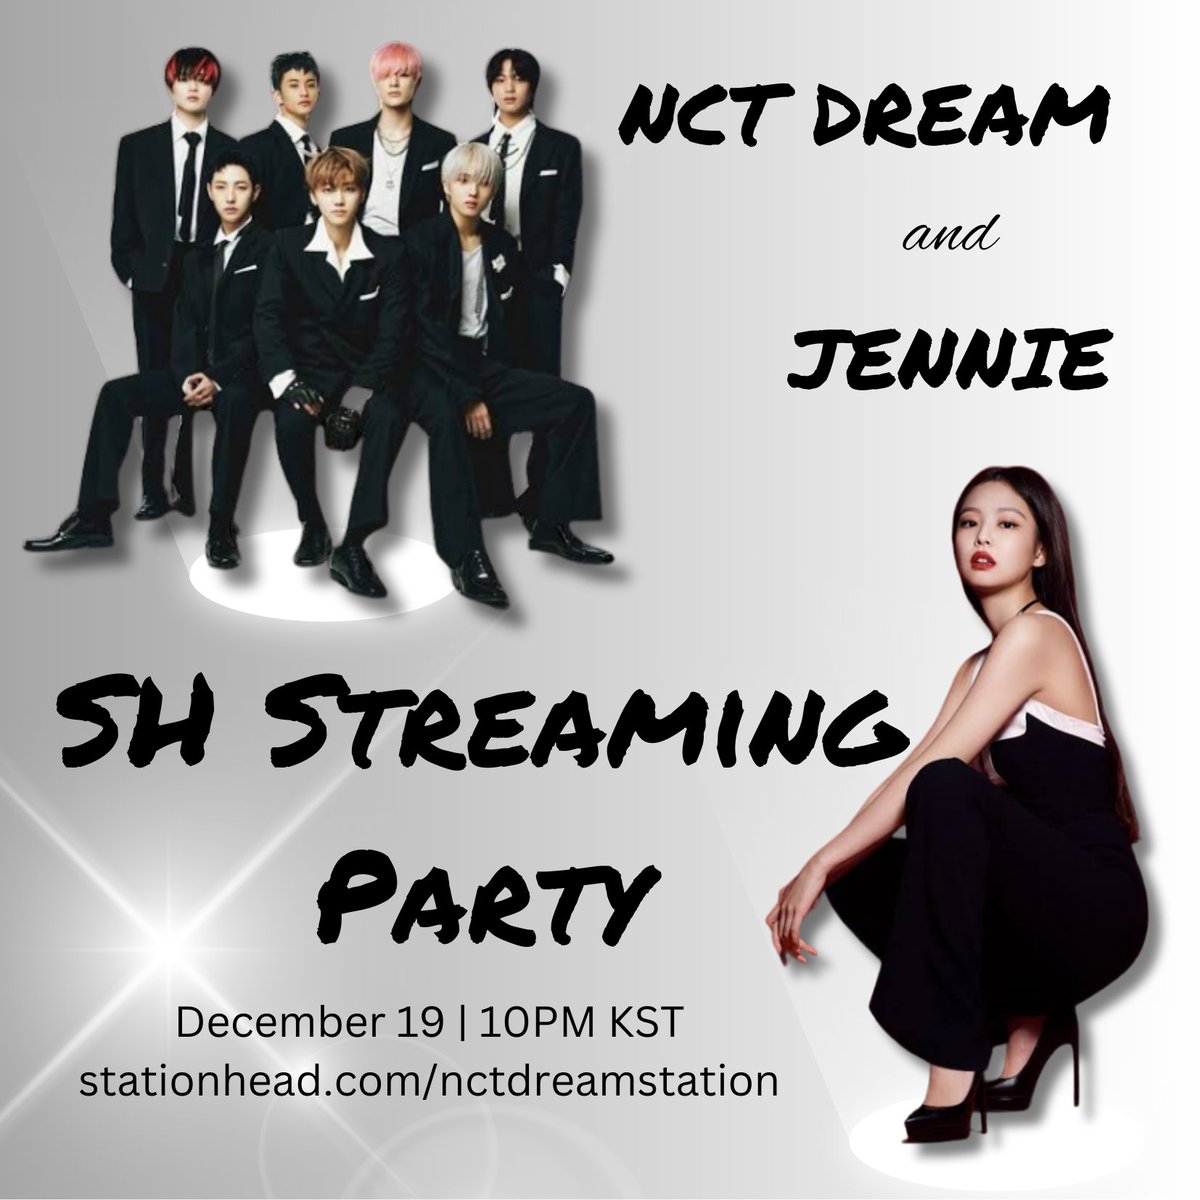 Hi! Join us on Tuesday for a JENNIE X NCT DREAM SH Streaming Collaboration with @DREAMZONECORE! 😊 🗓 : December 19 | 10PM KST 🖇 : stationhead.com/nctdreamstation See you guys there! #JENNIE #NCTDREAM